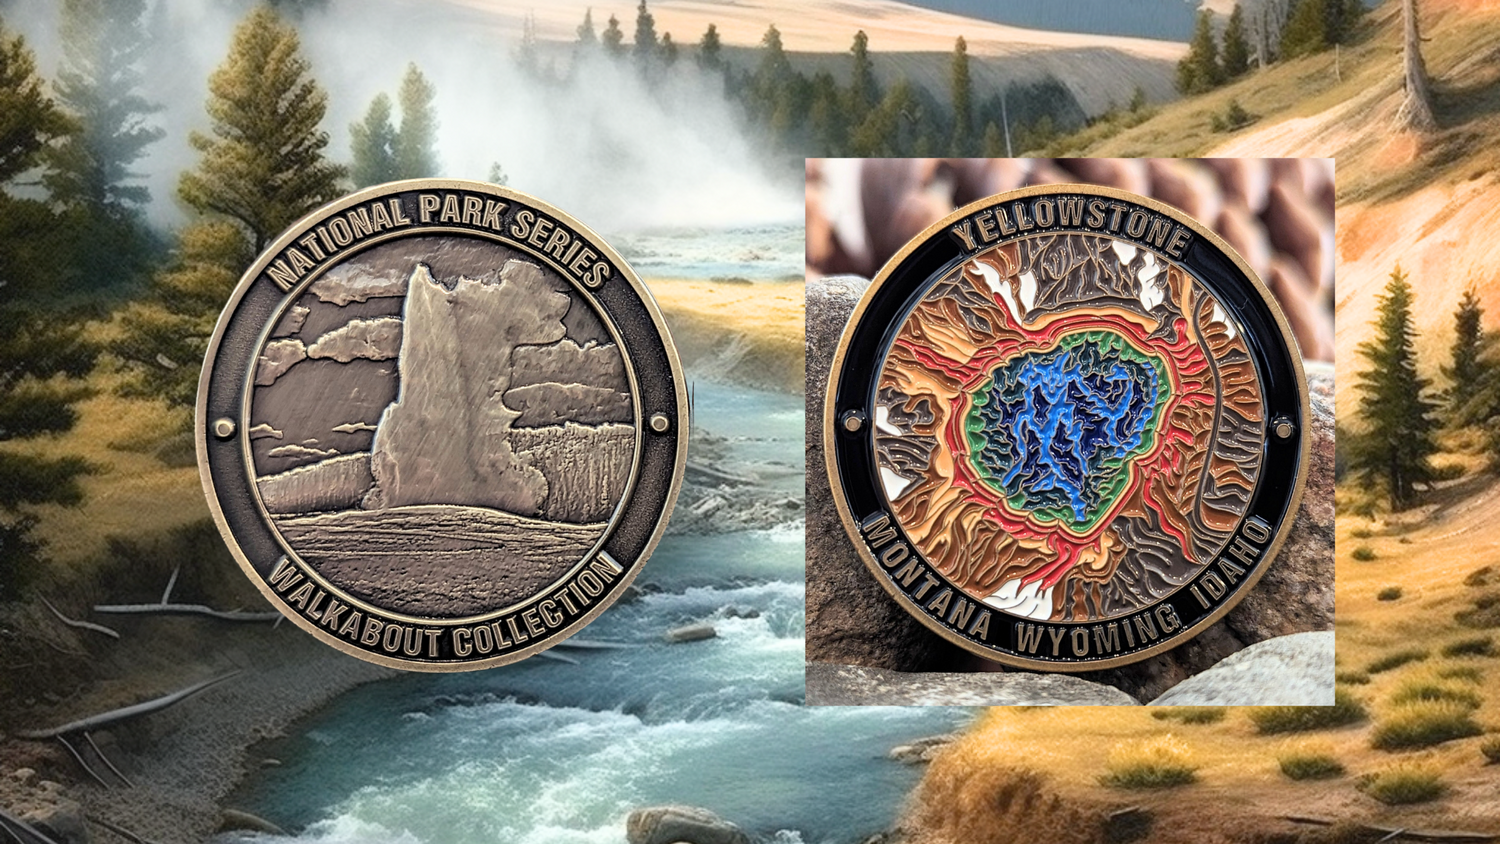 YELLOWSTONE NATIONAL PARK CHALLENGE COIN